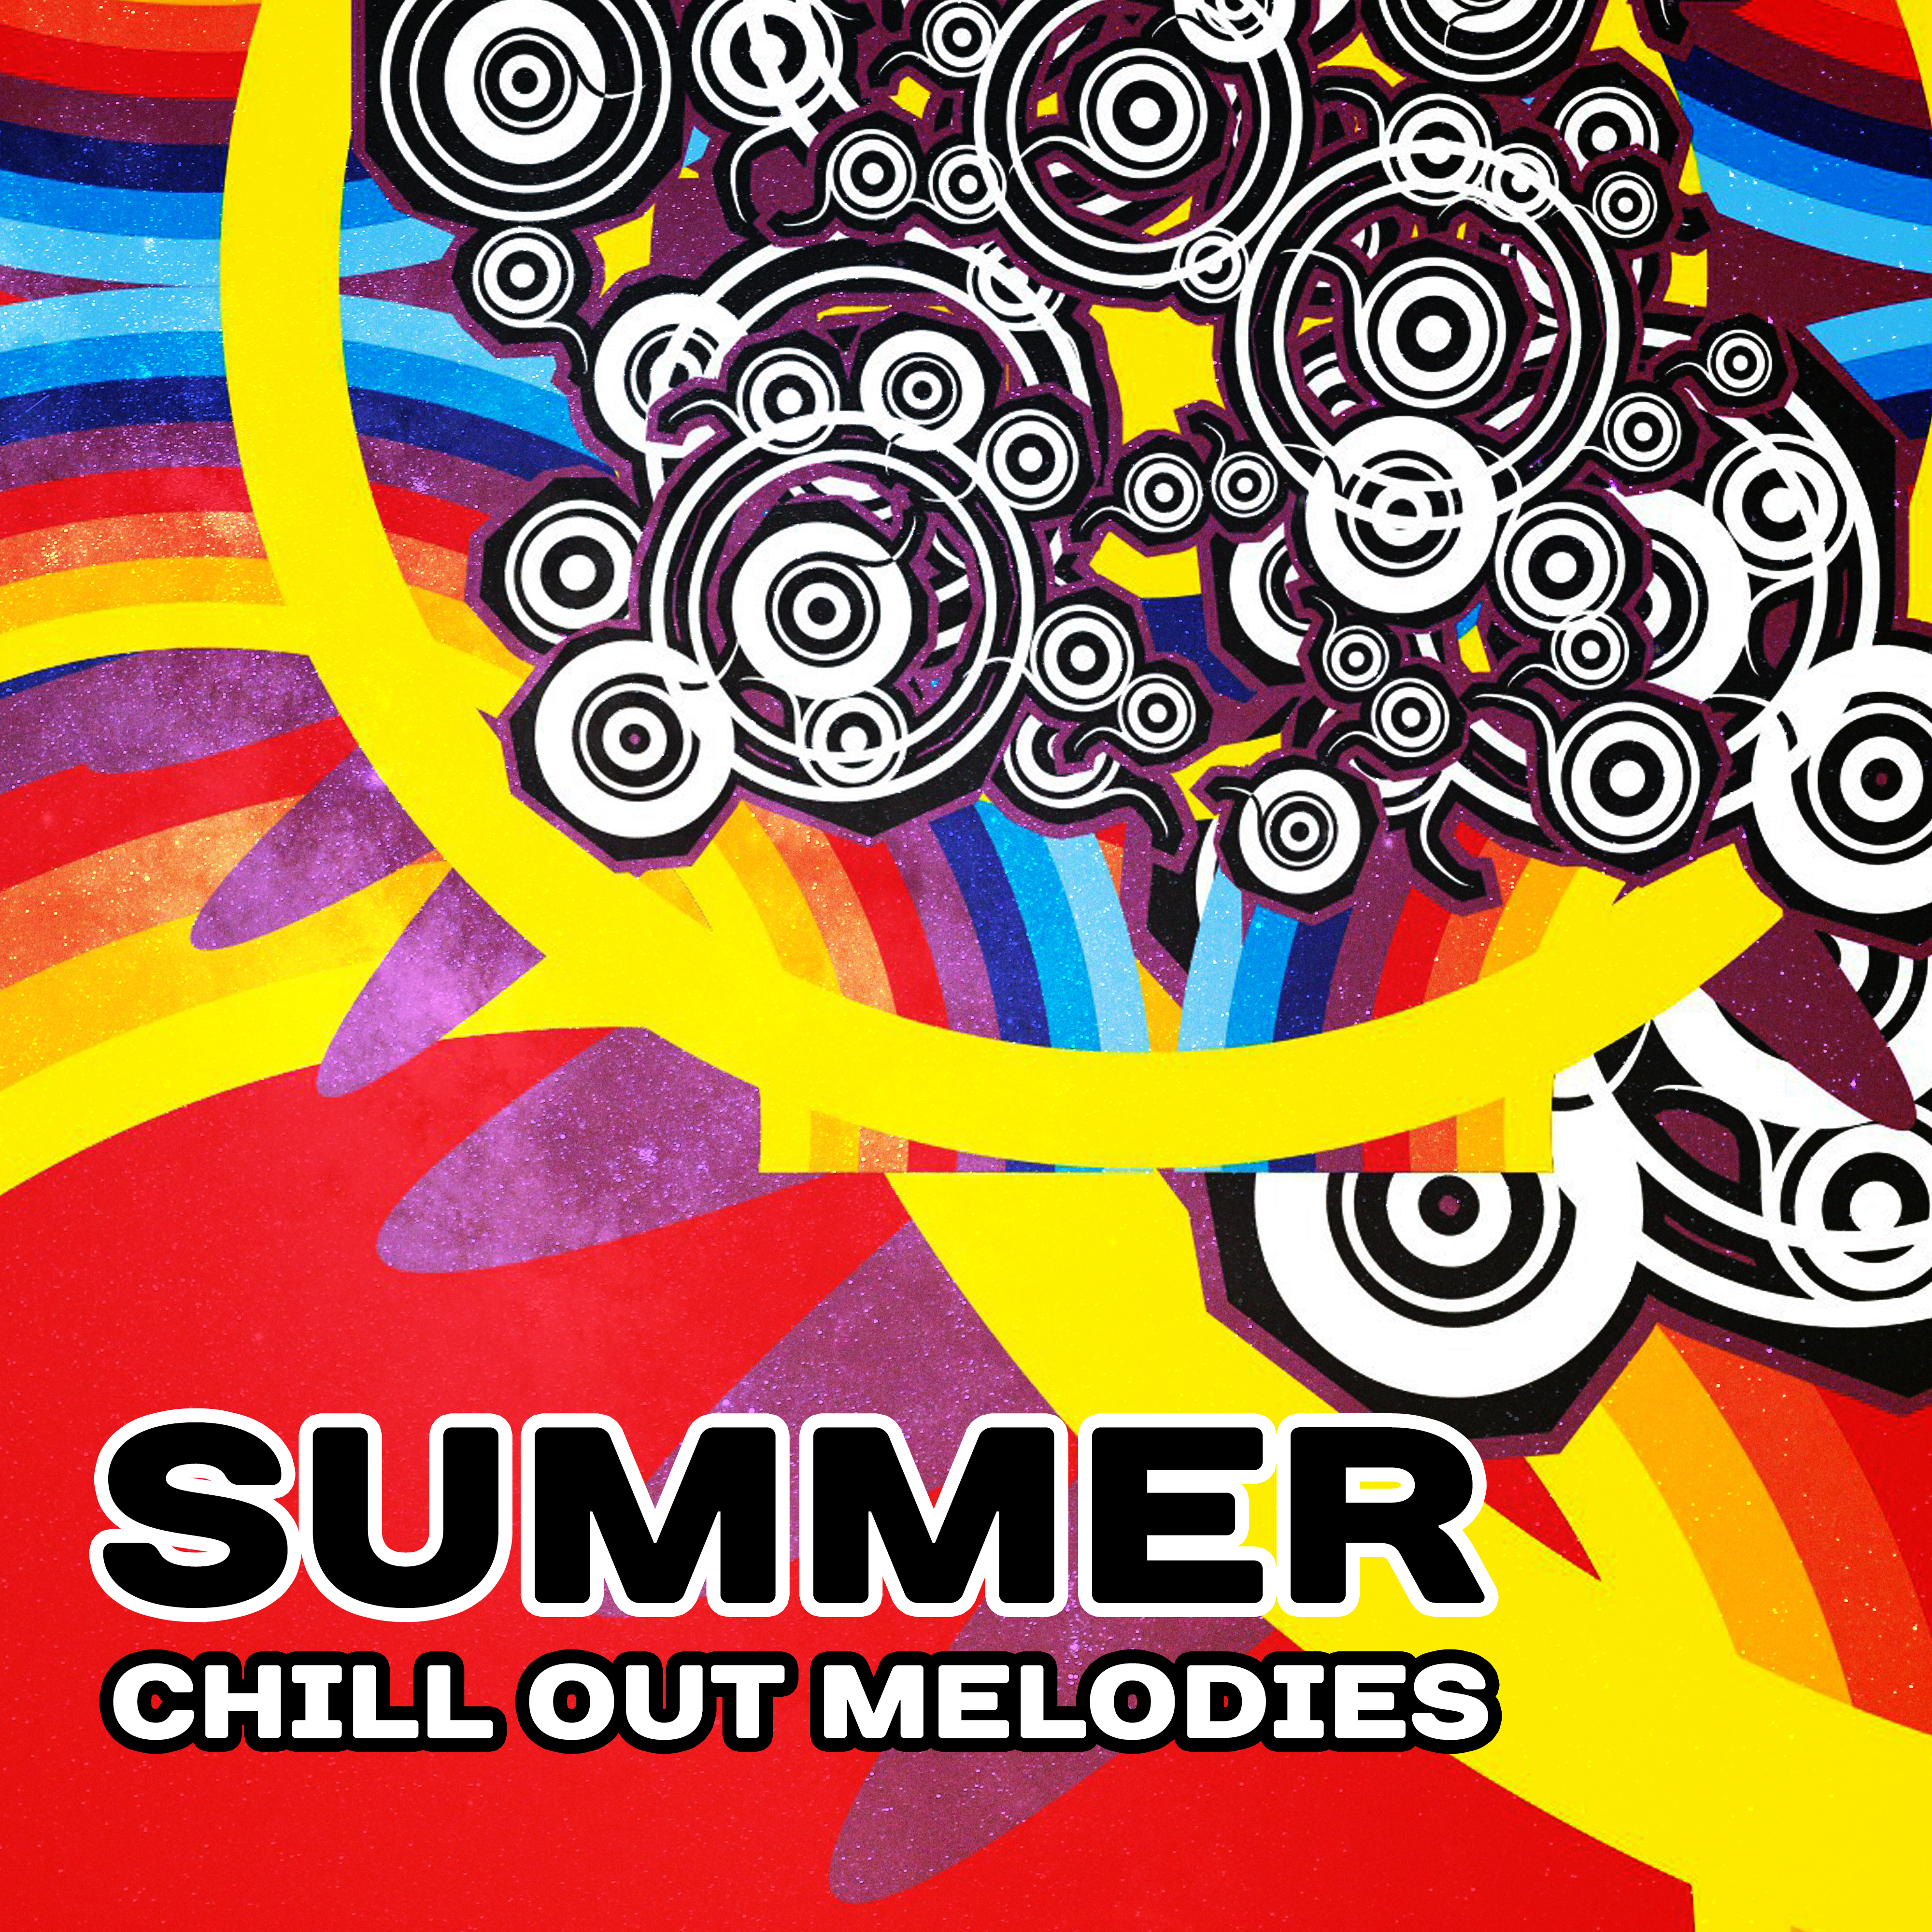 Summer Chill Out Melodies  Calm Sounds to Relax, Chill Out 2017, Holiday Music, Rest on the Island